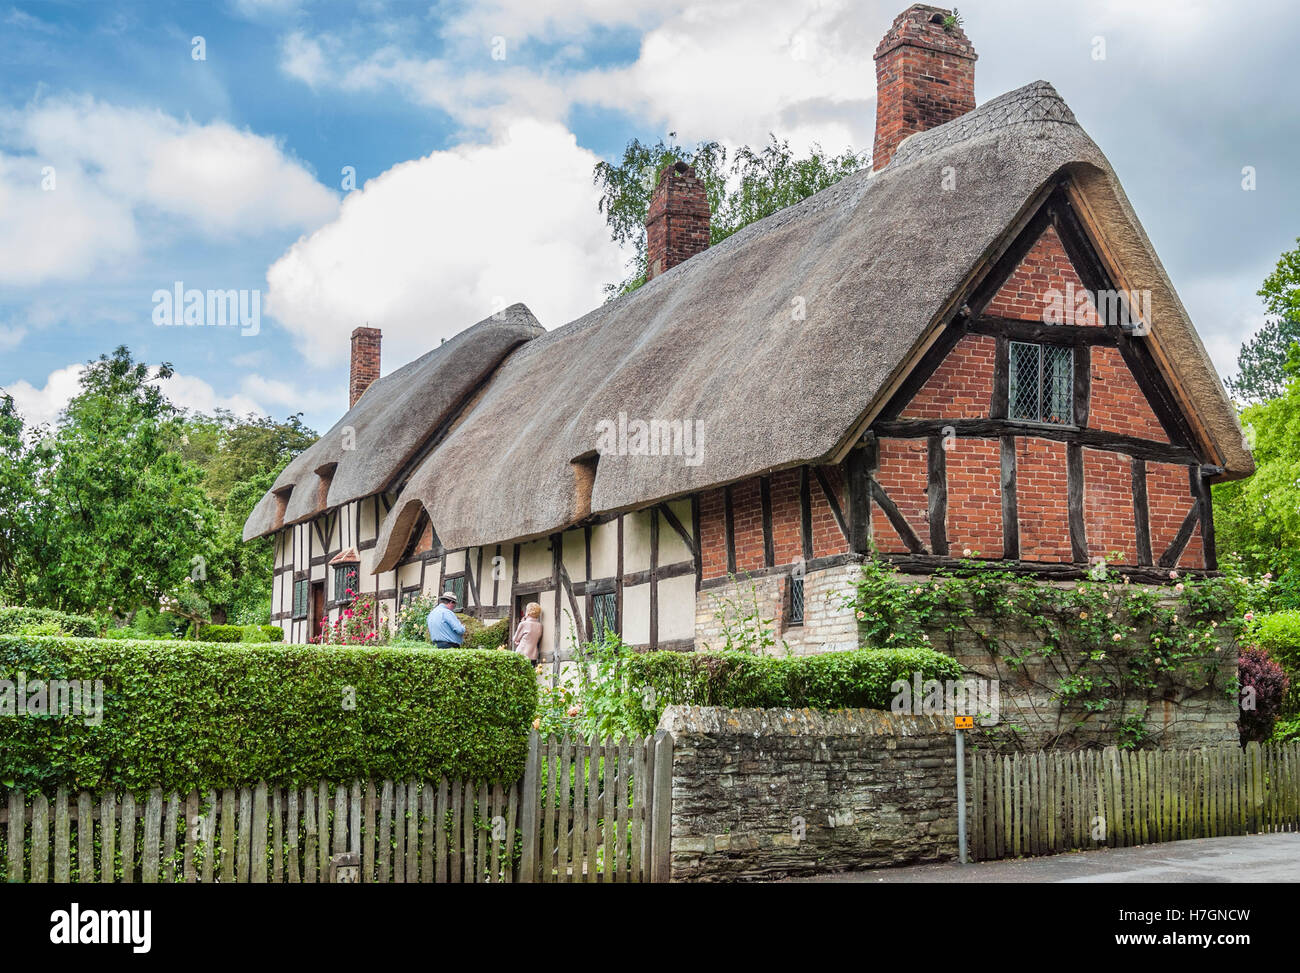 Anne Hathaway Cottage Stratford Upon Avon England At The Stock Photo Alamy